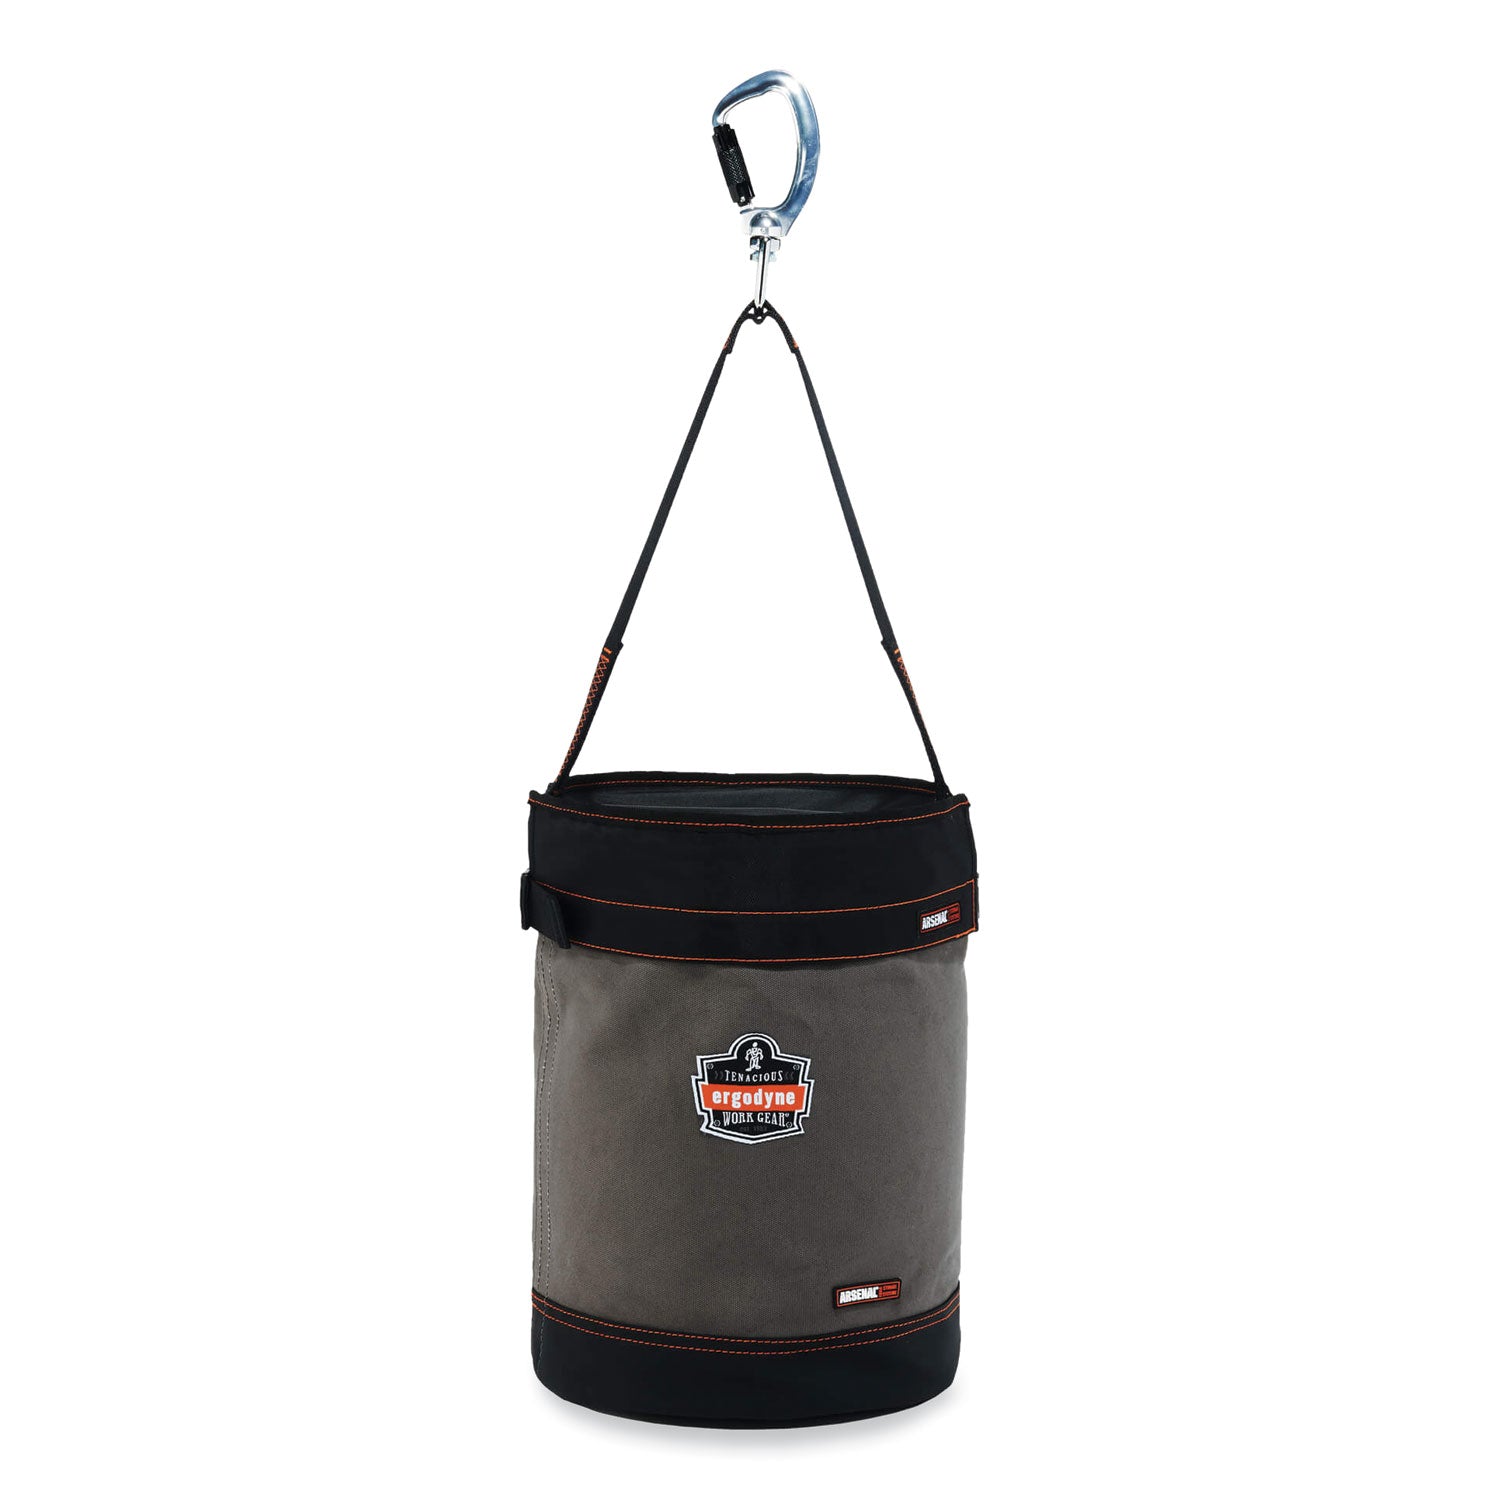 arsenal-5940t-swiveling-carabiner-canvas-hoist-bucket-and-top-150-lb-gray-ships-in-1-3-business-days_ego14840 - 1